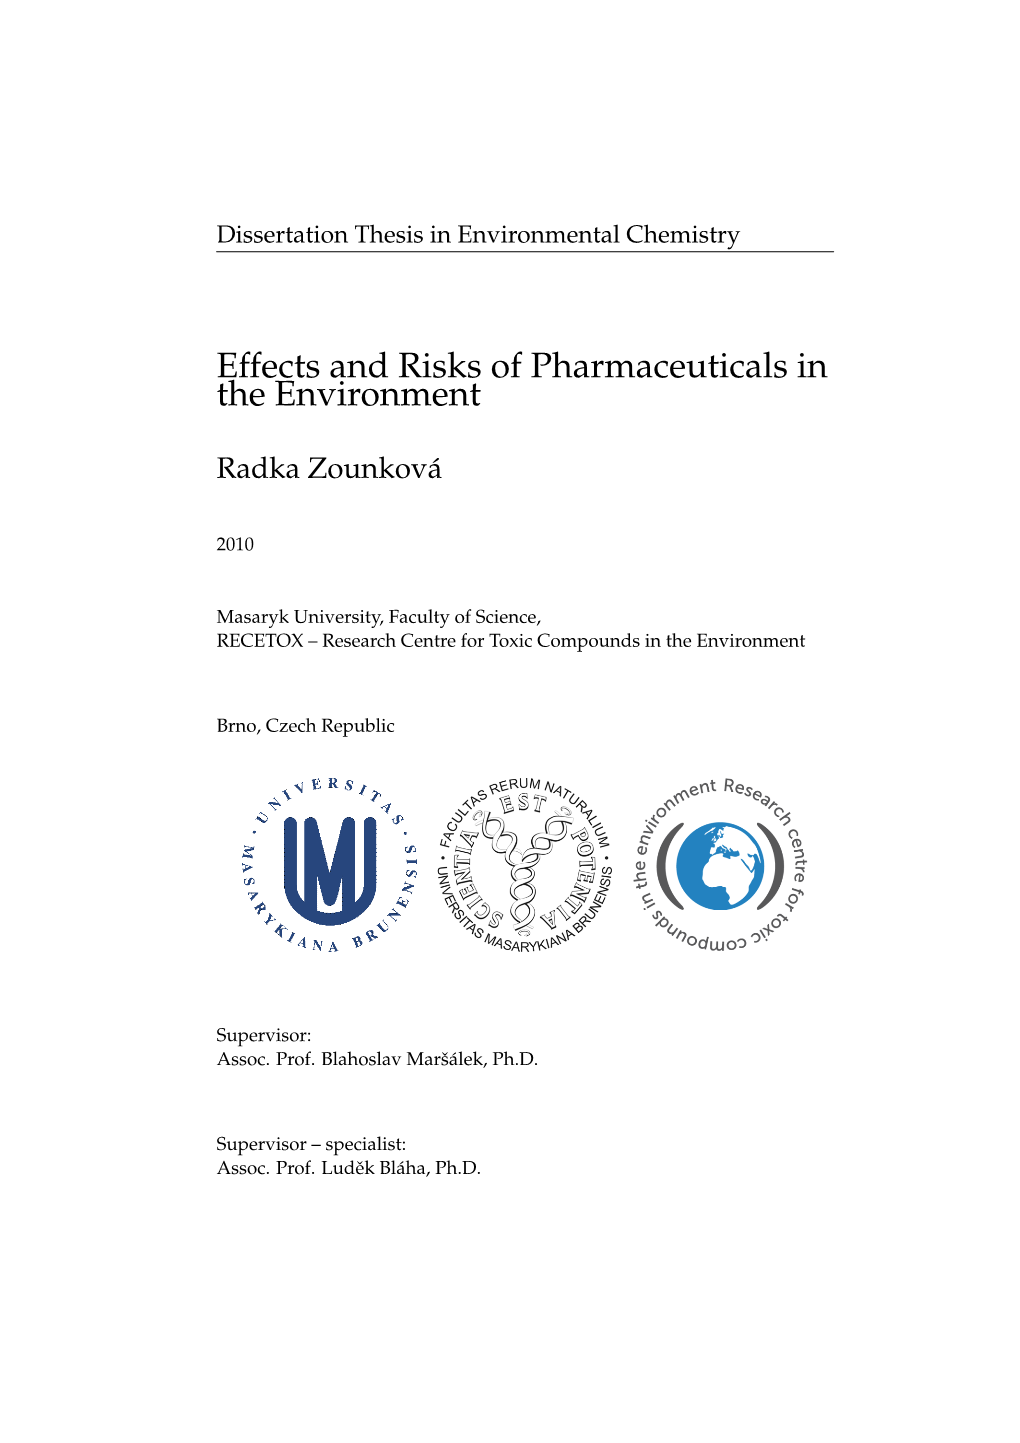 Effects and Risks of Pharmaceuticals in the Environment